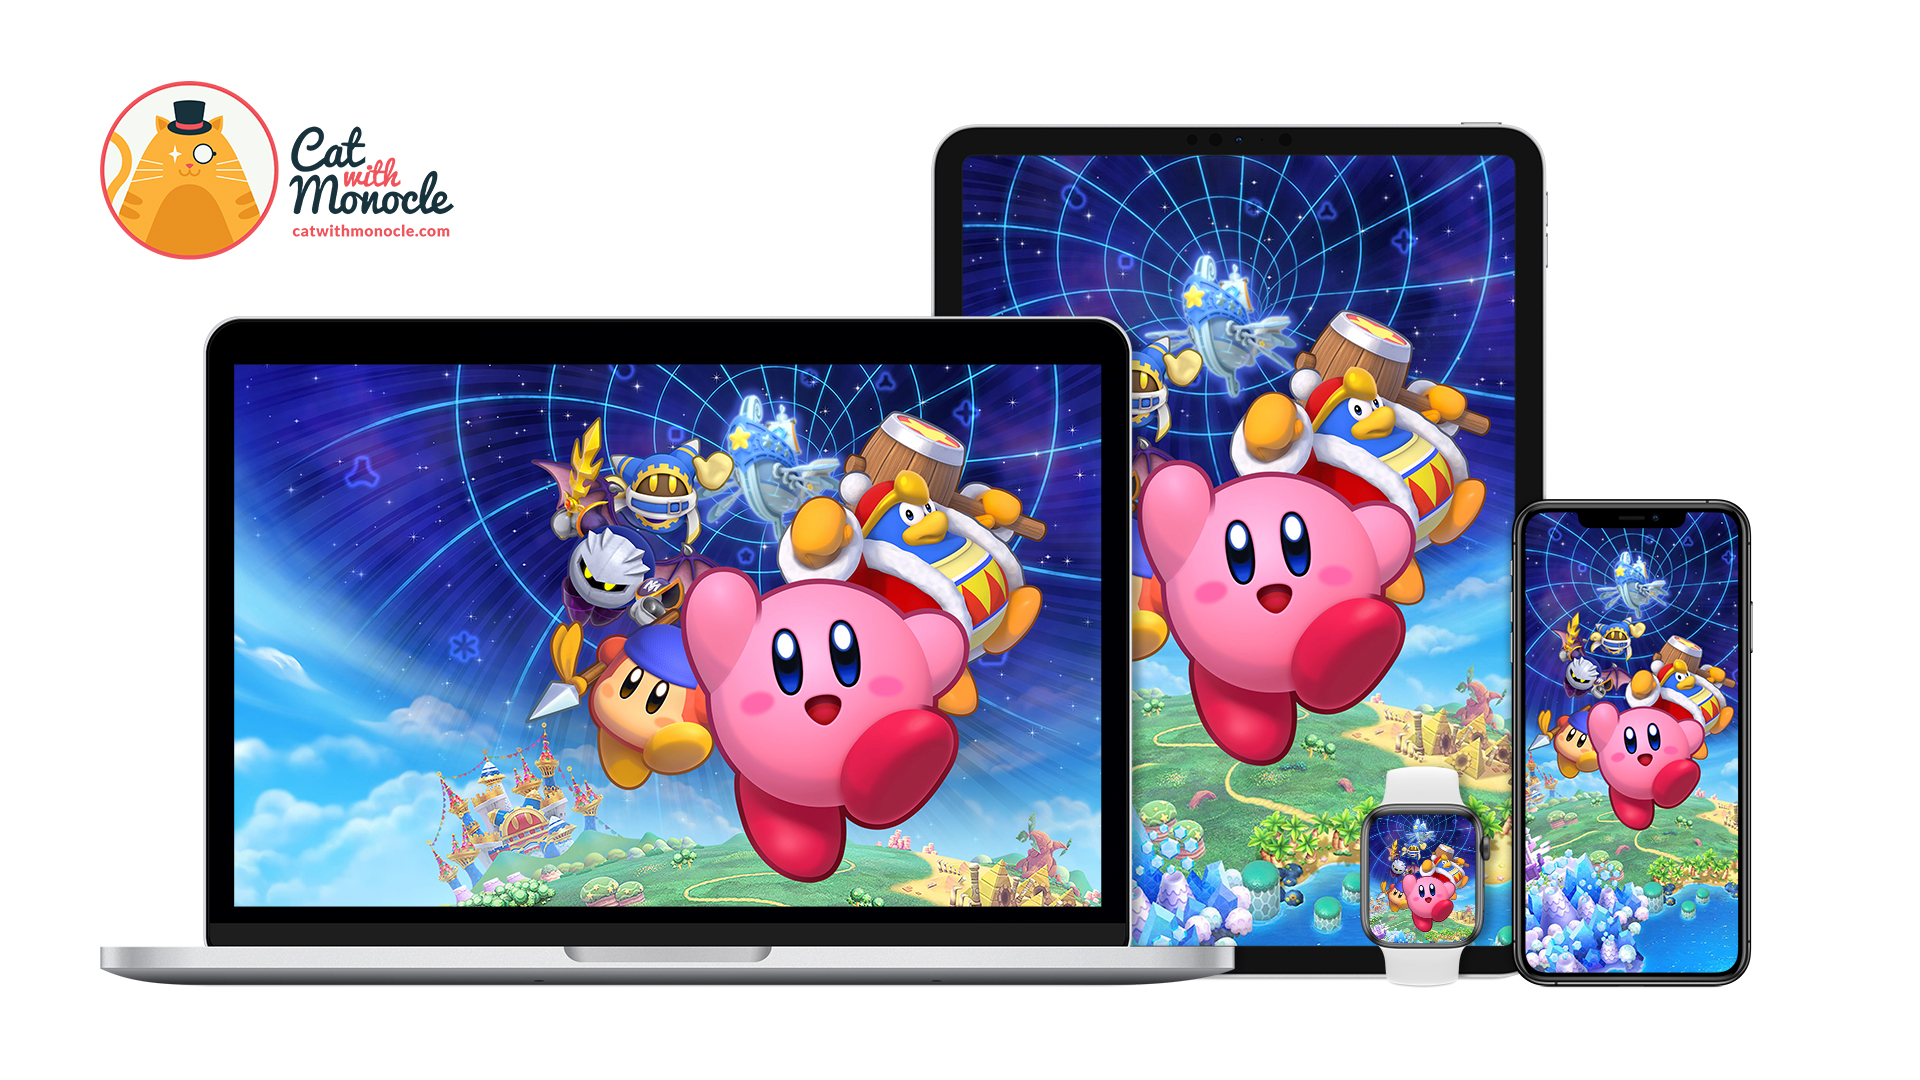 Kirby's Return to Dream Land Deluxe screenshots - Image #31814